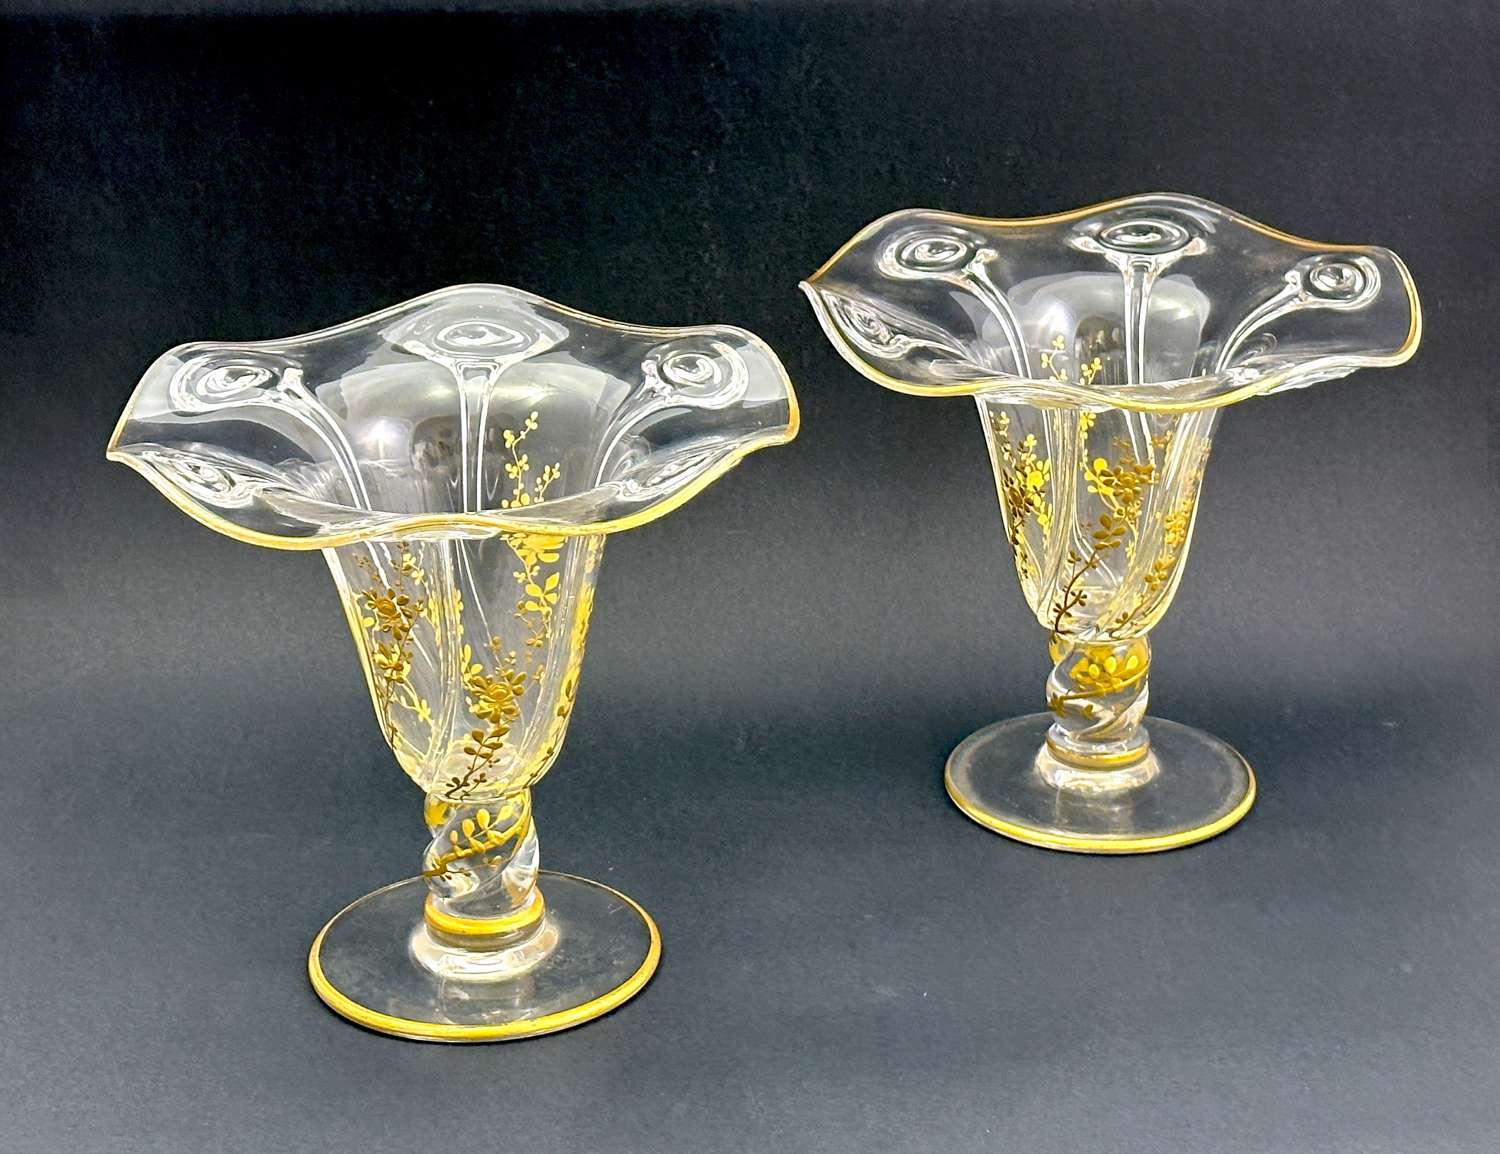 Pair of St Louis Crystal Vases with Gold Enamel Flower Decoration